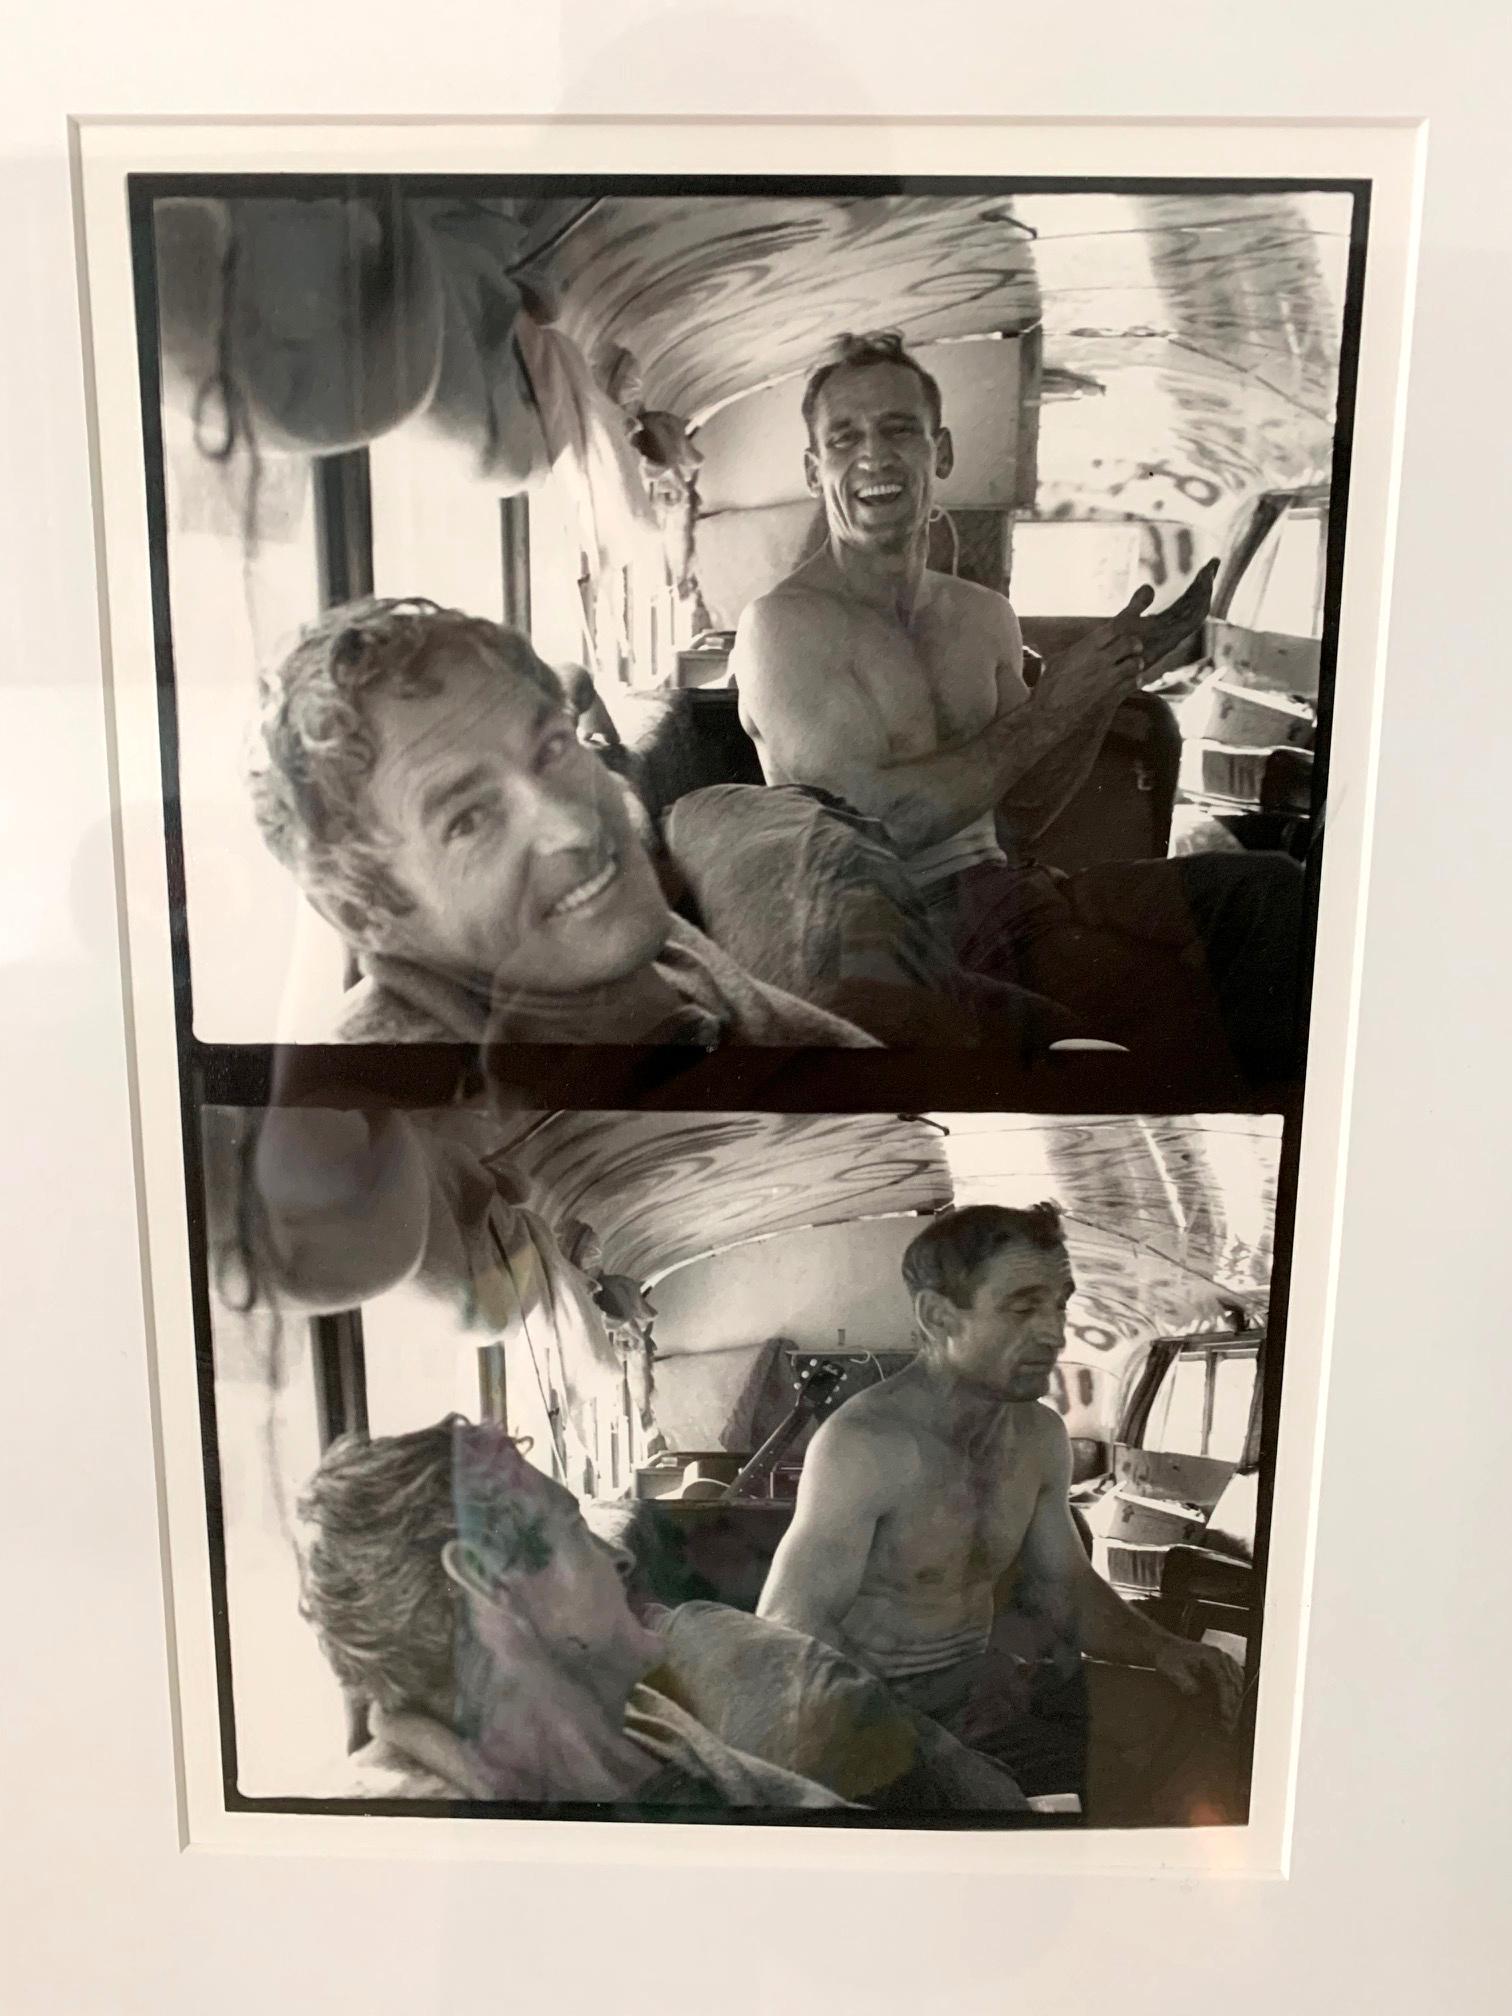 Modern Photograph of Neal Cassady and Timothy Leary by Allen Ginsberg